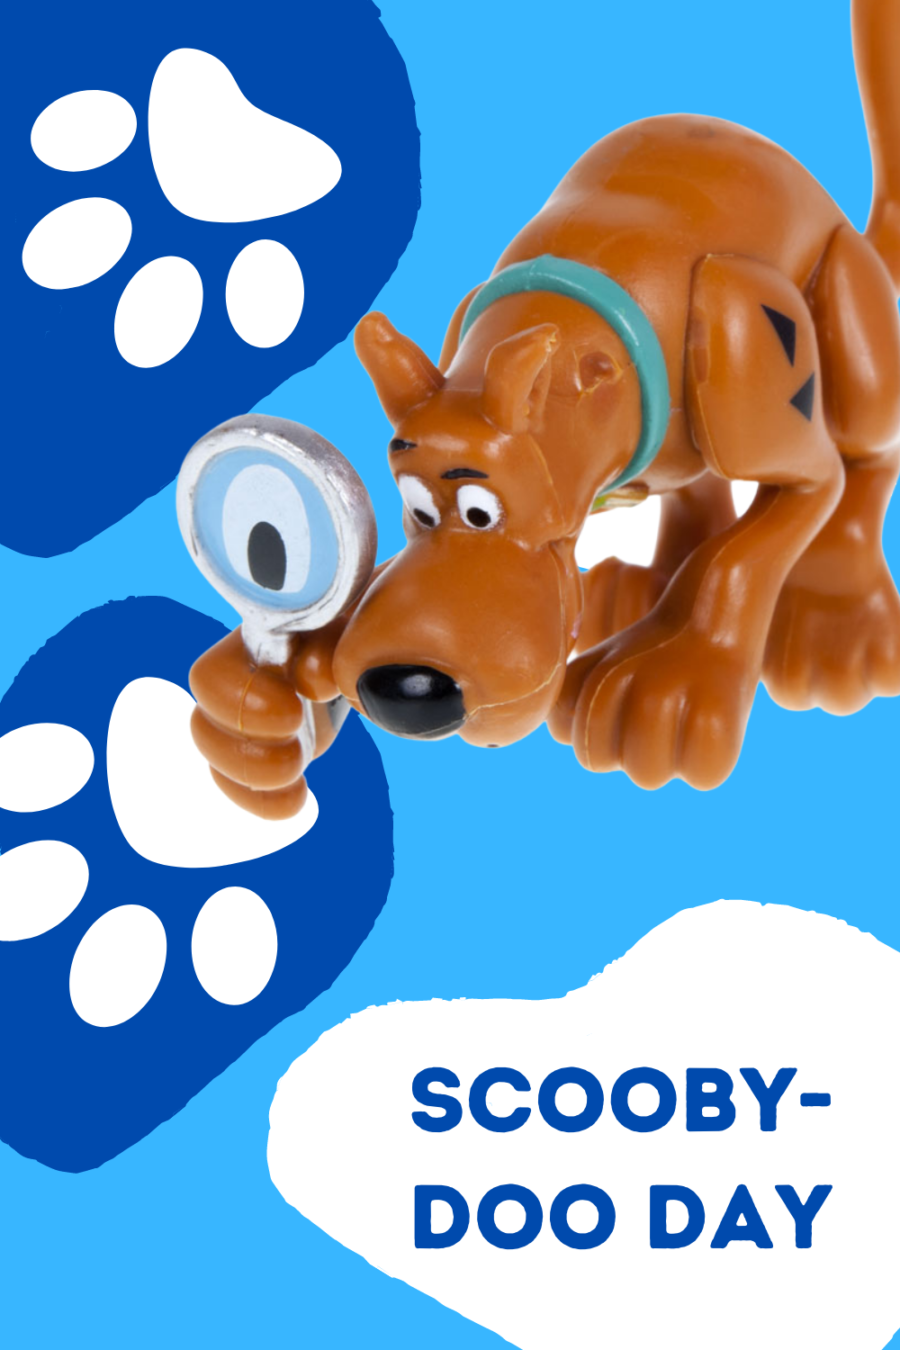 Scooby Doo Day is September 13